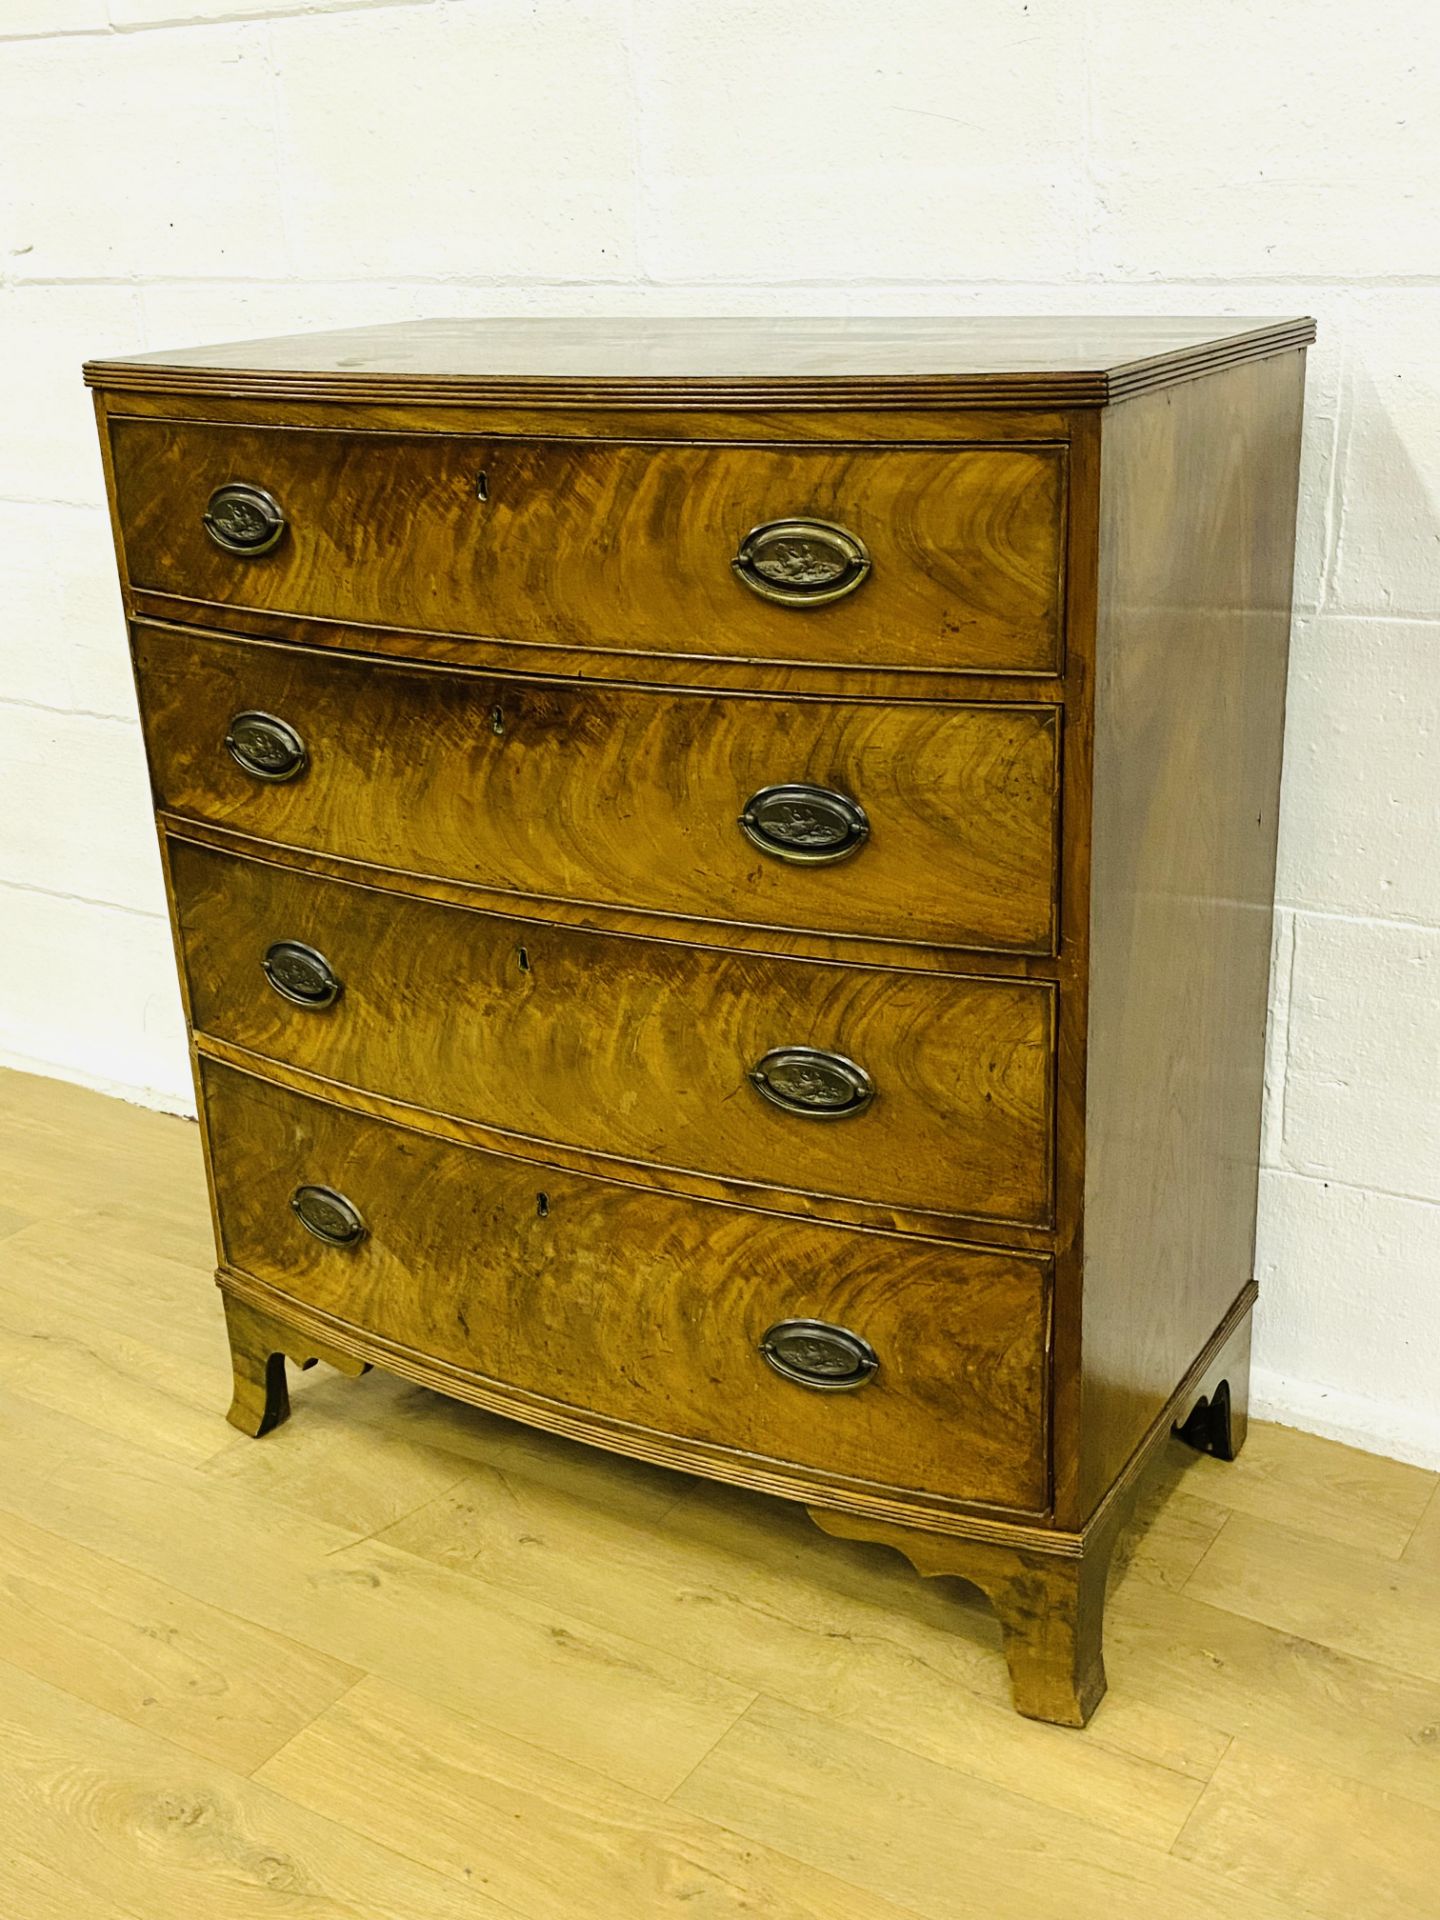 Bow fronted chest of drawers - Image 3 of 8